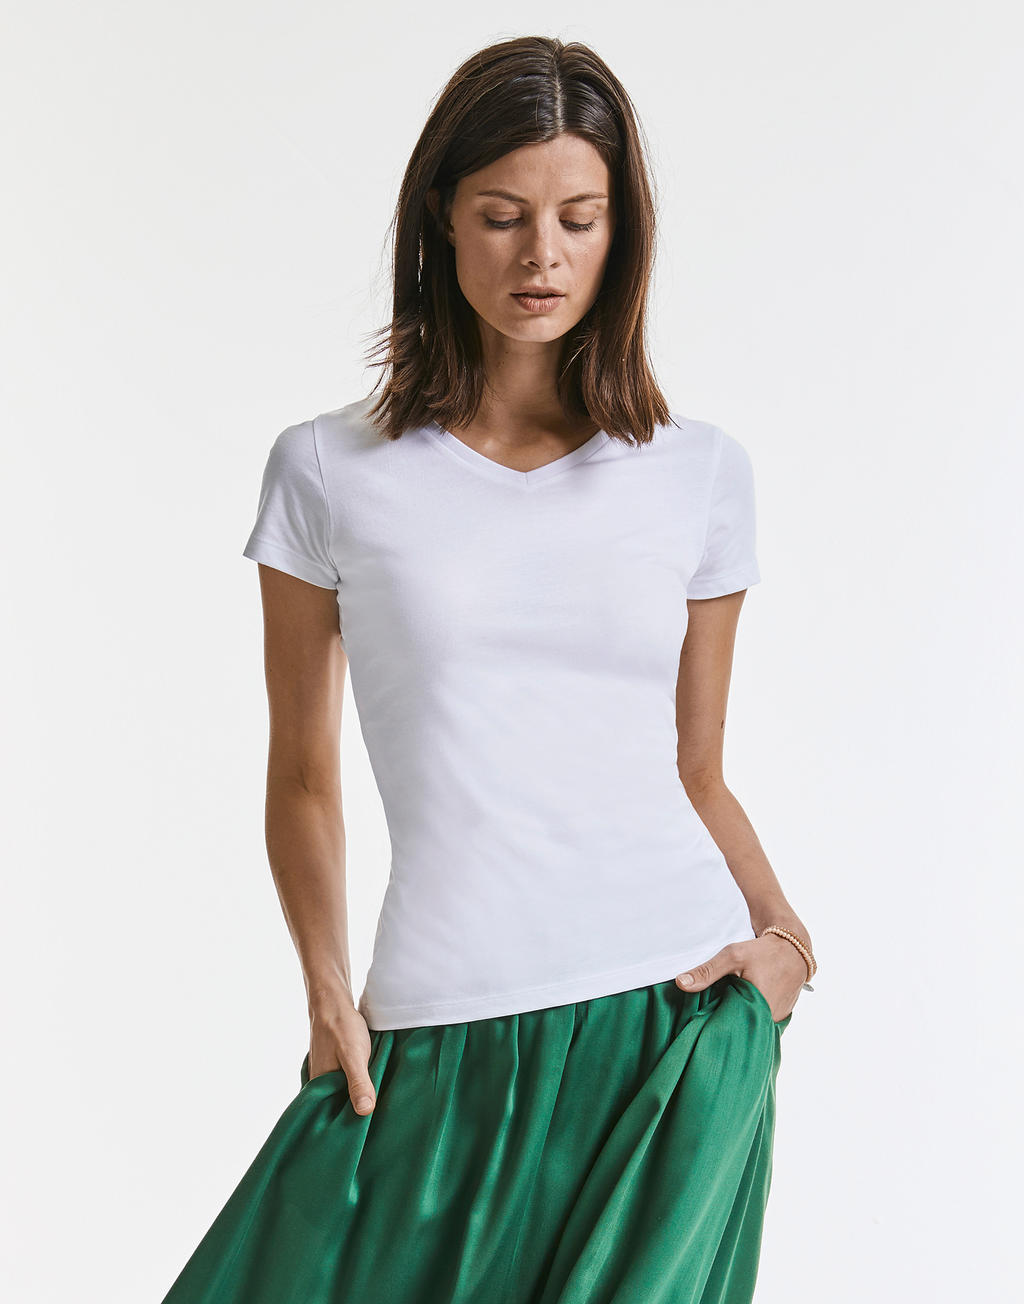  Ladies Pure Organic V-Neck Tee in Farbe White